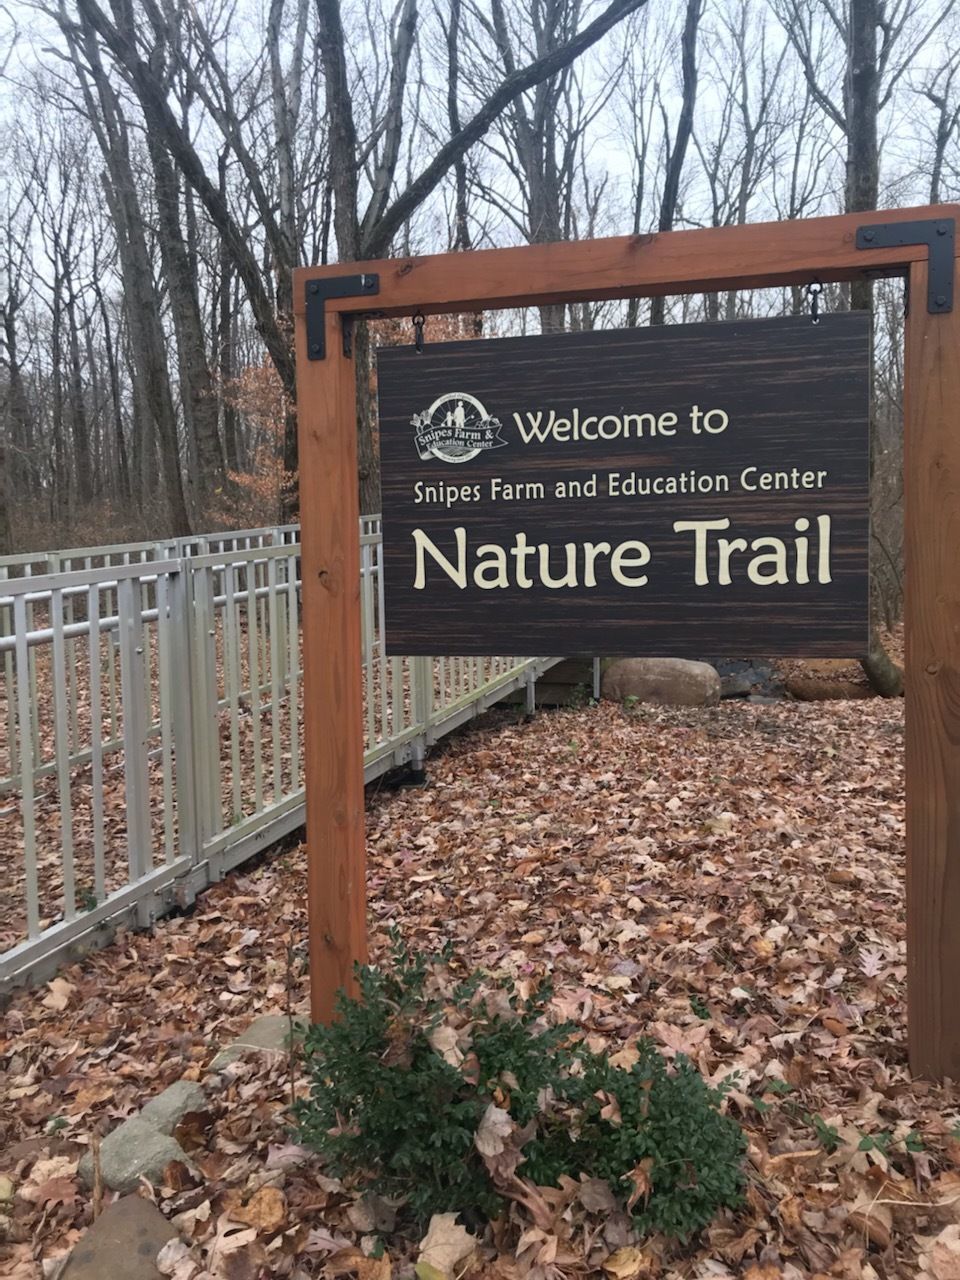 Take a Walk on the Nature Trail